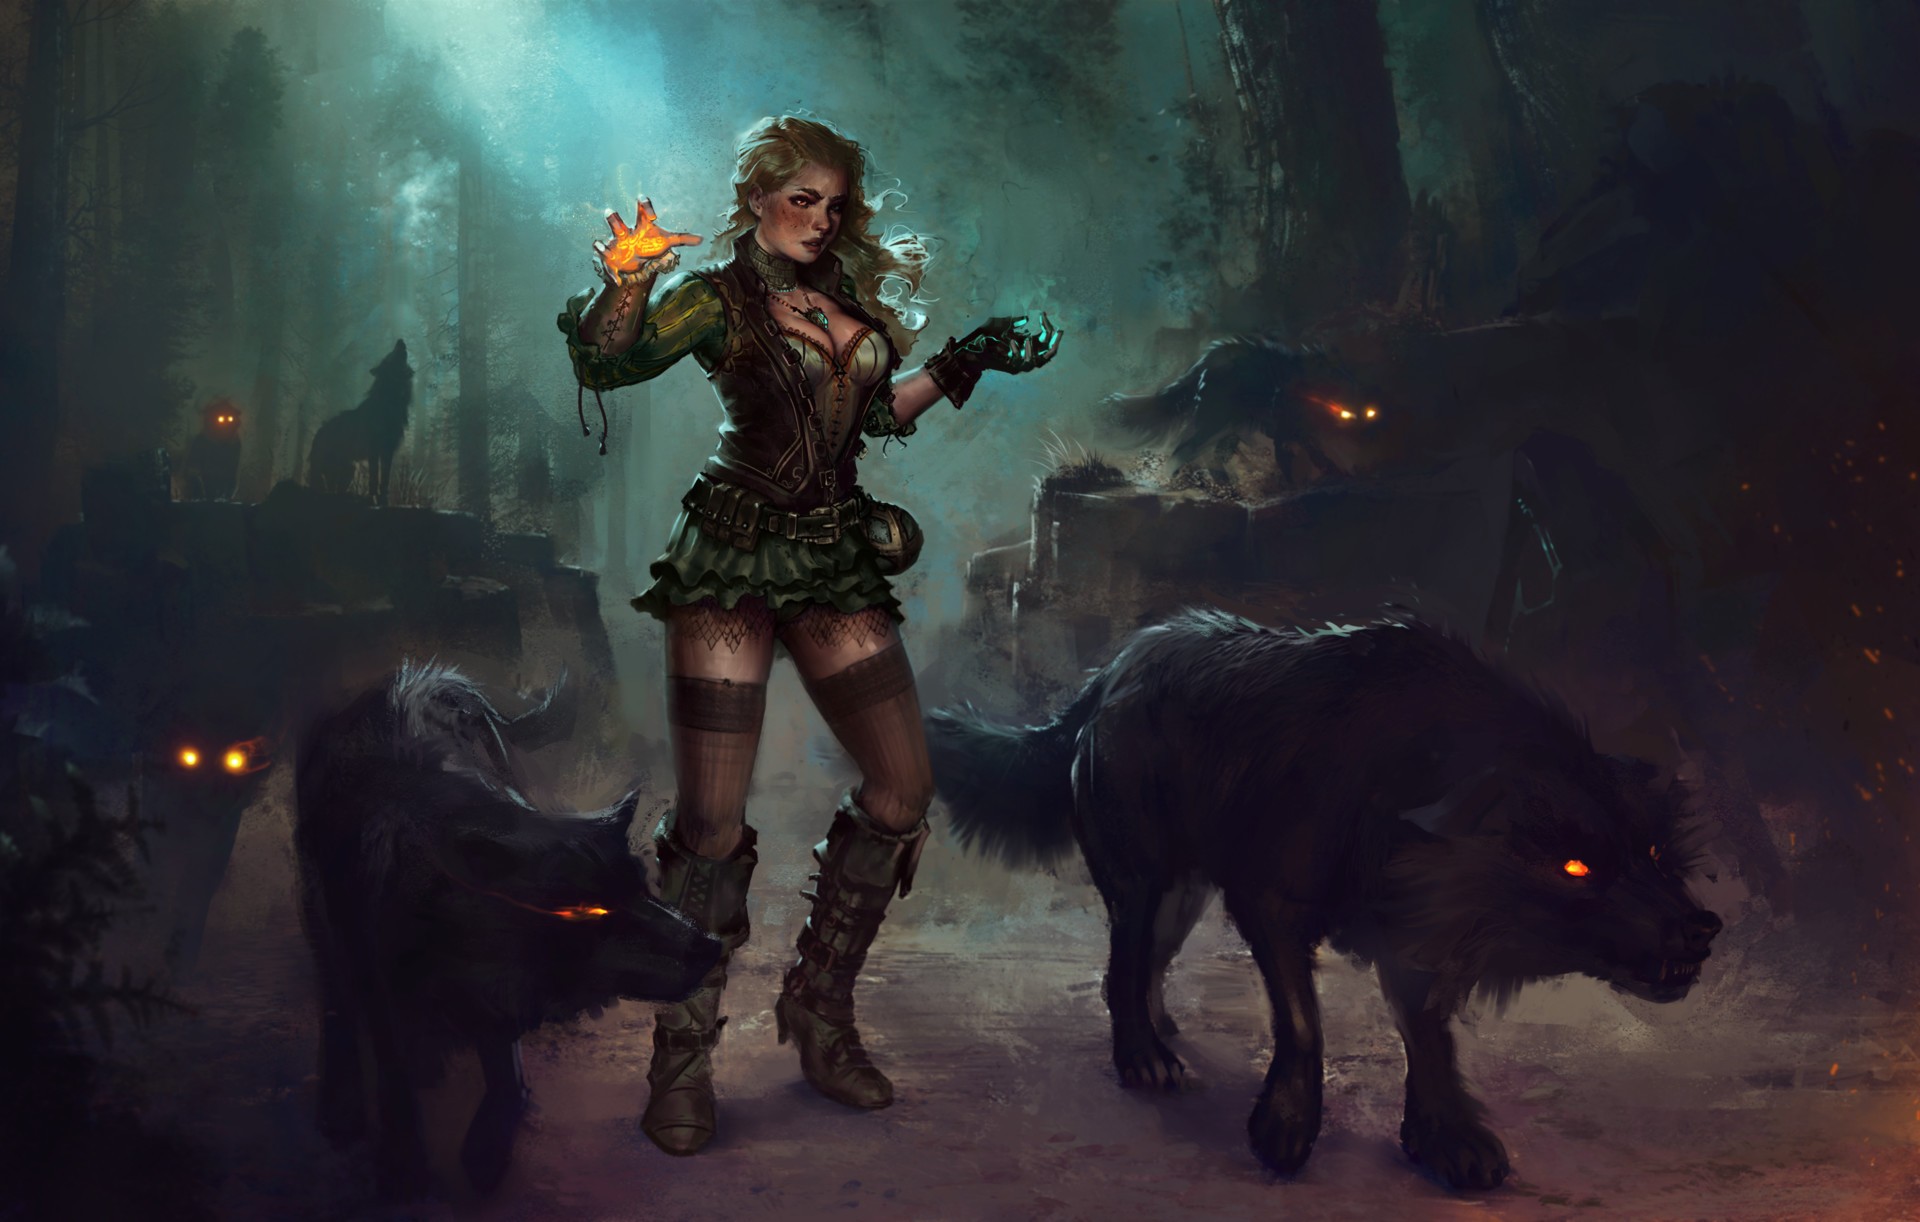 General 1920x1222 fantasy art magic cleavage women artwork thighs glowing eyes howling forest stockings knee-high boots fantasy girl creature